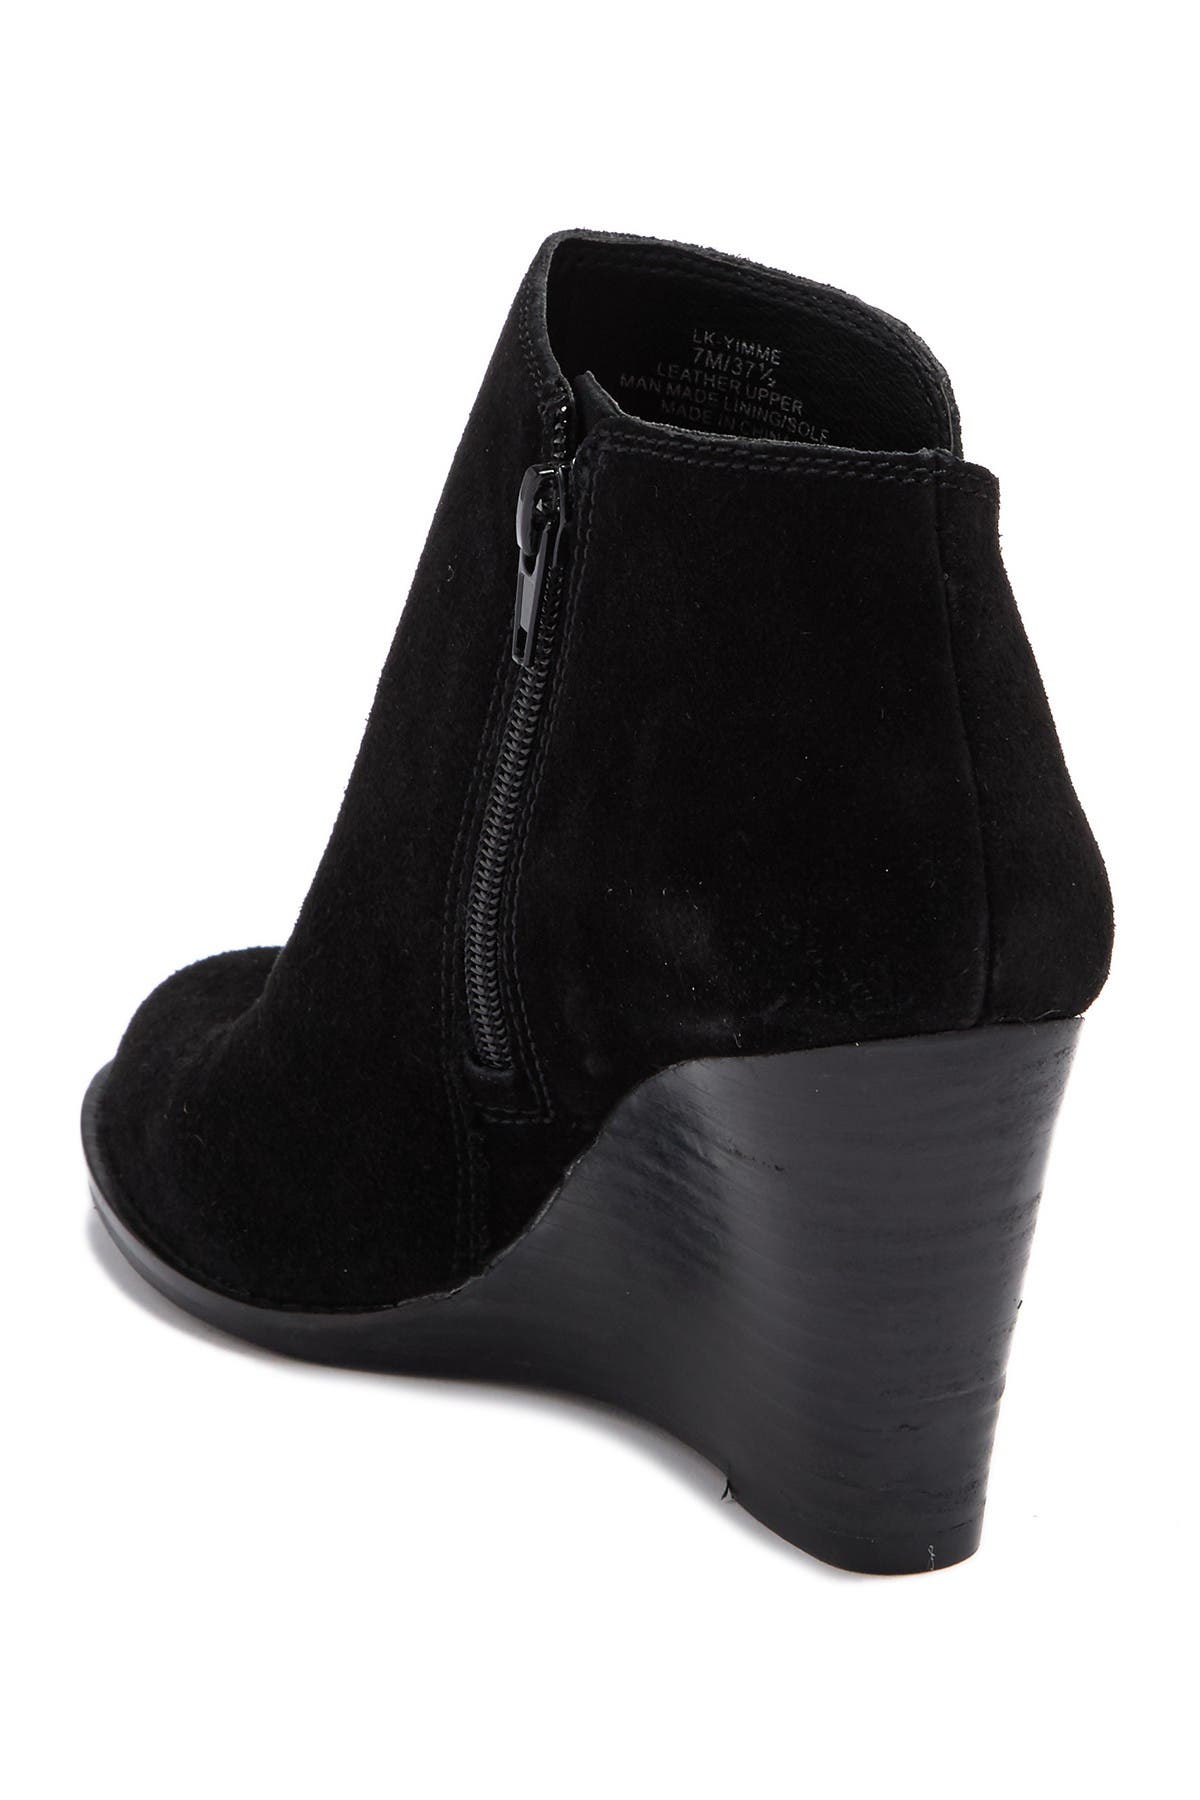 yimmie wedge bootie